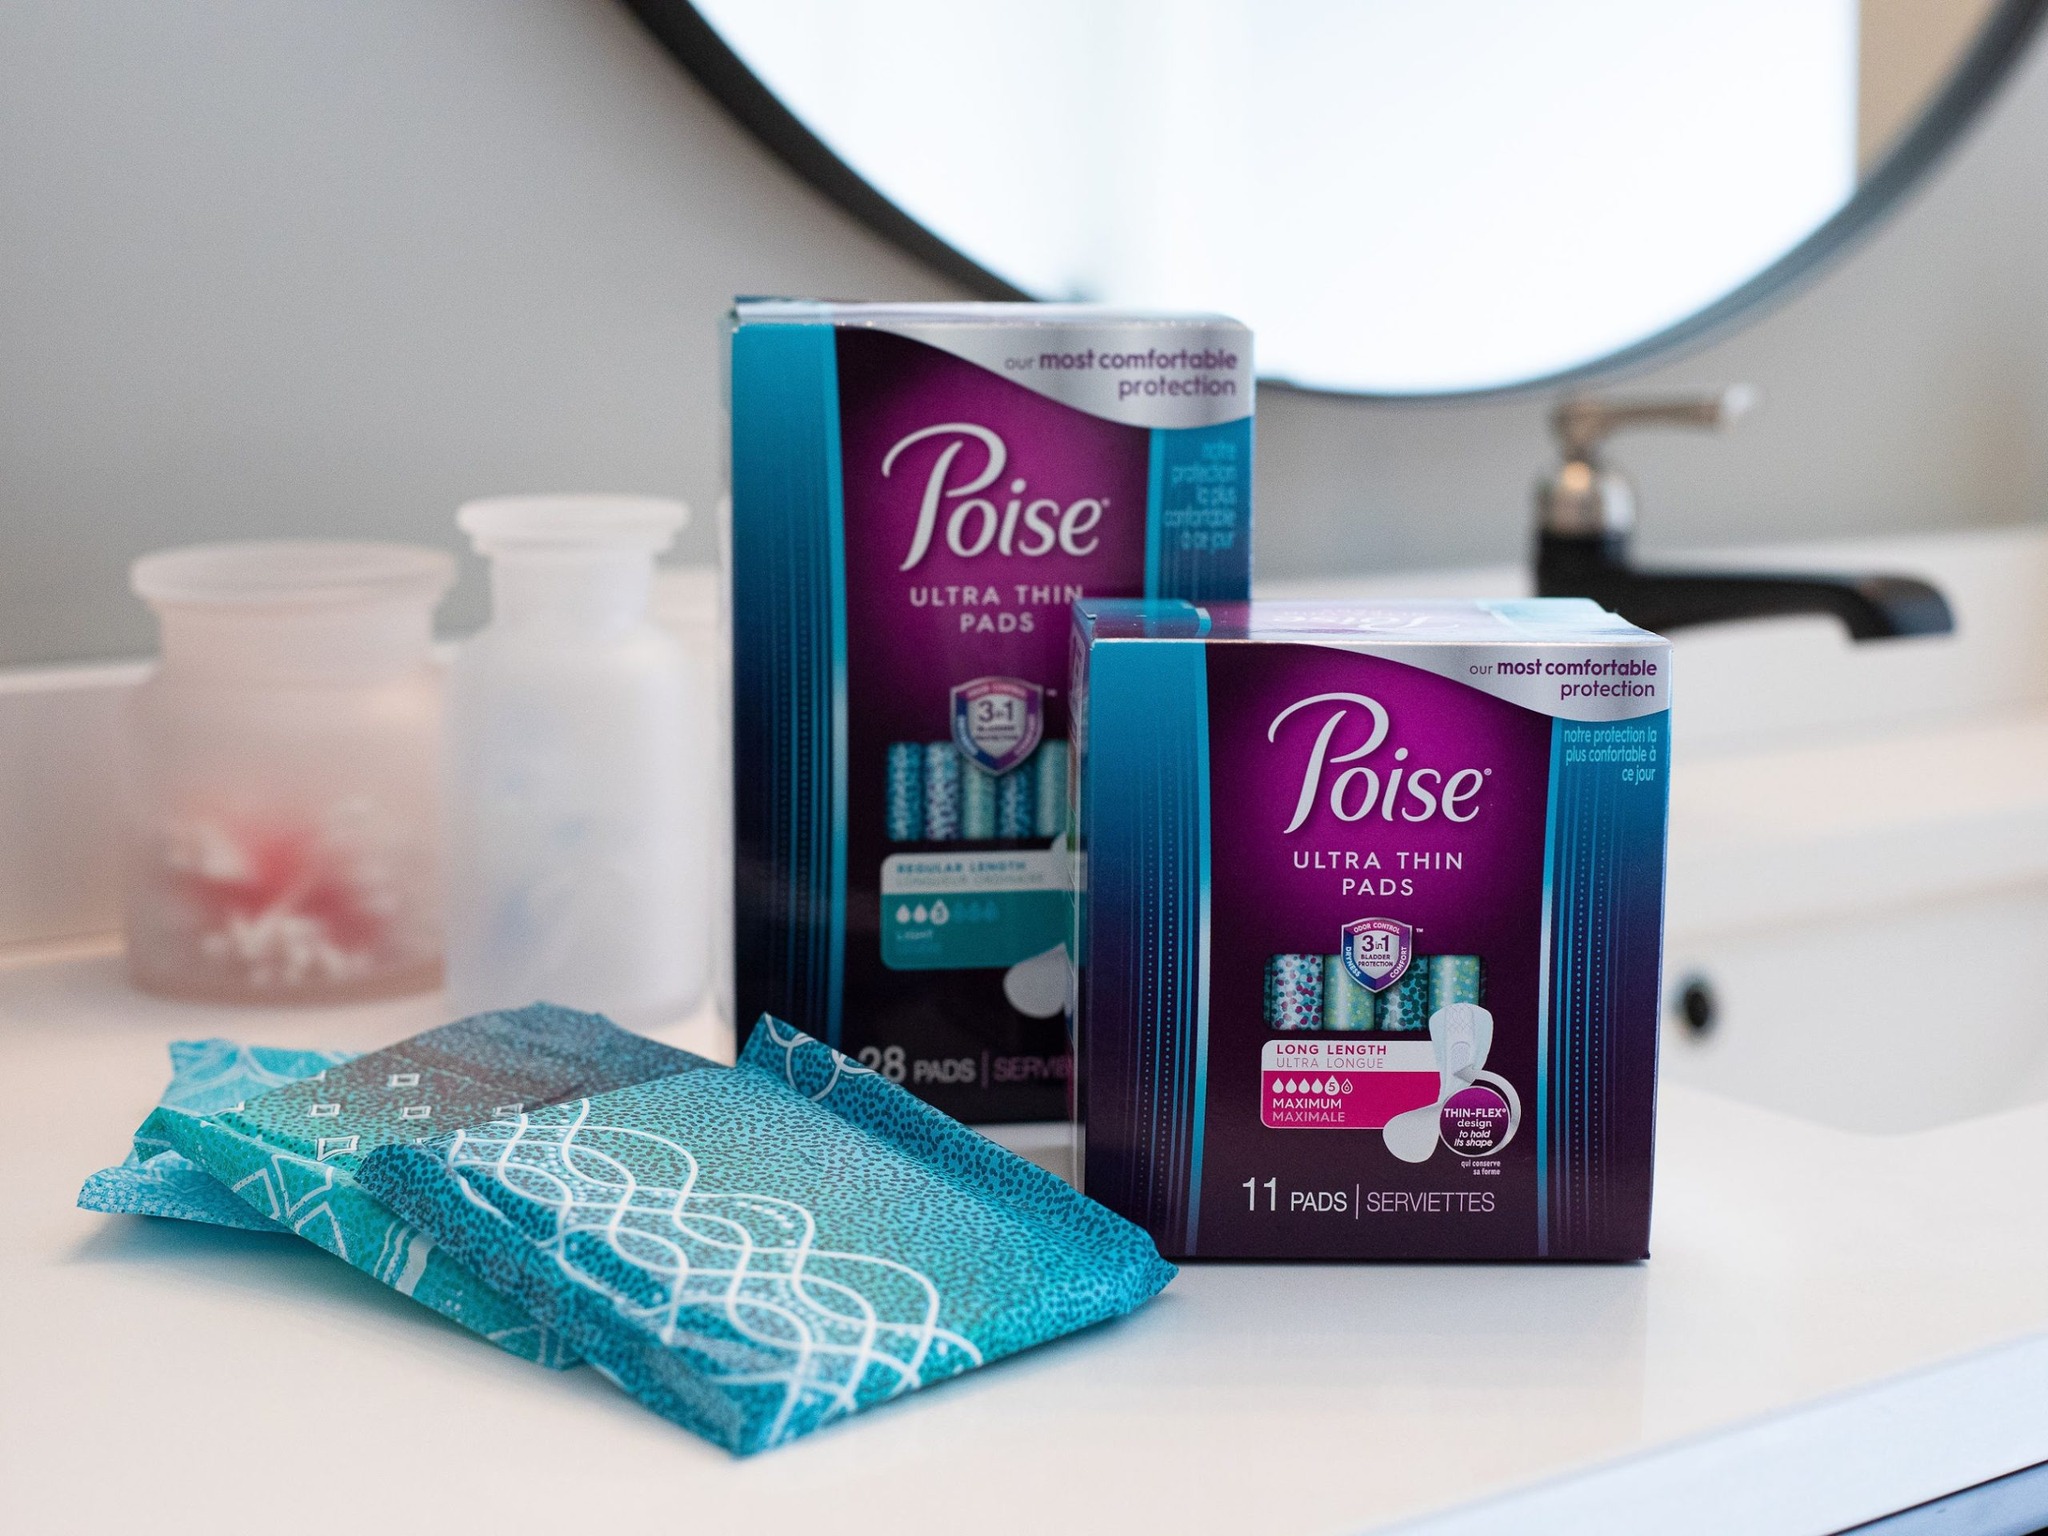 Poise Pads As Low As $2.89 At Publix